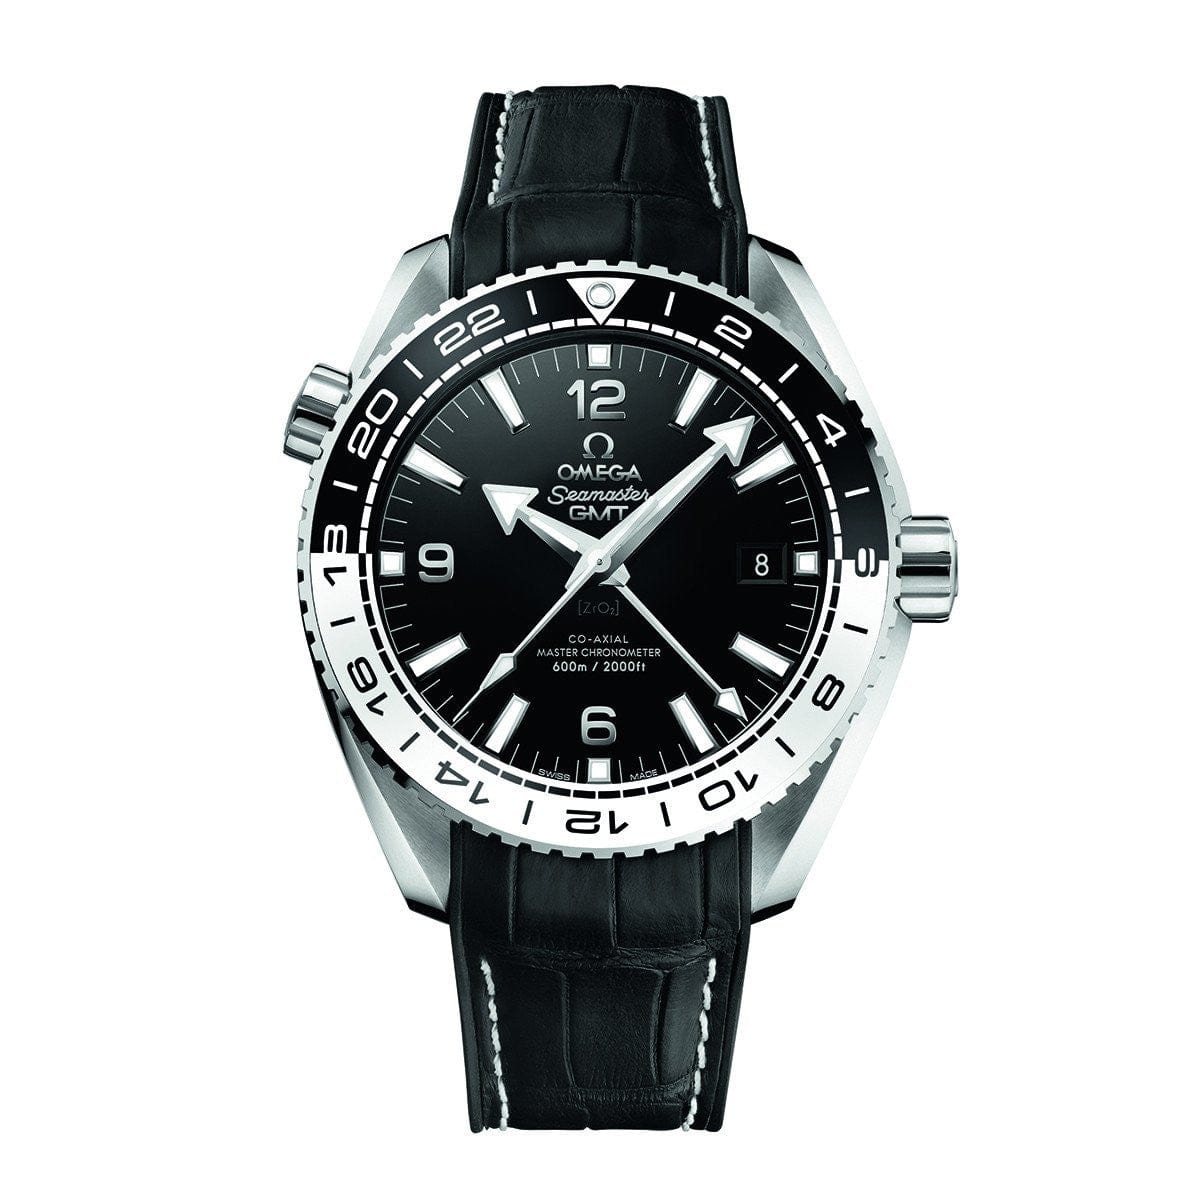 Seamaster Planet Ocean 600 M Omega Co-Axial Master Chronometer Gmt 